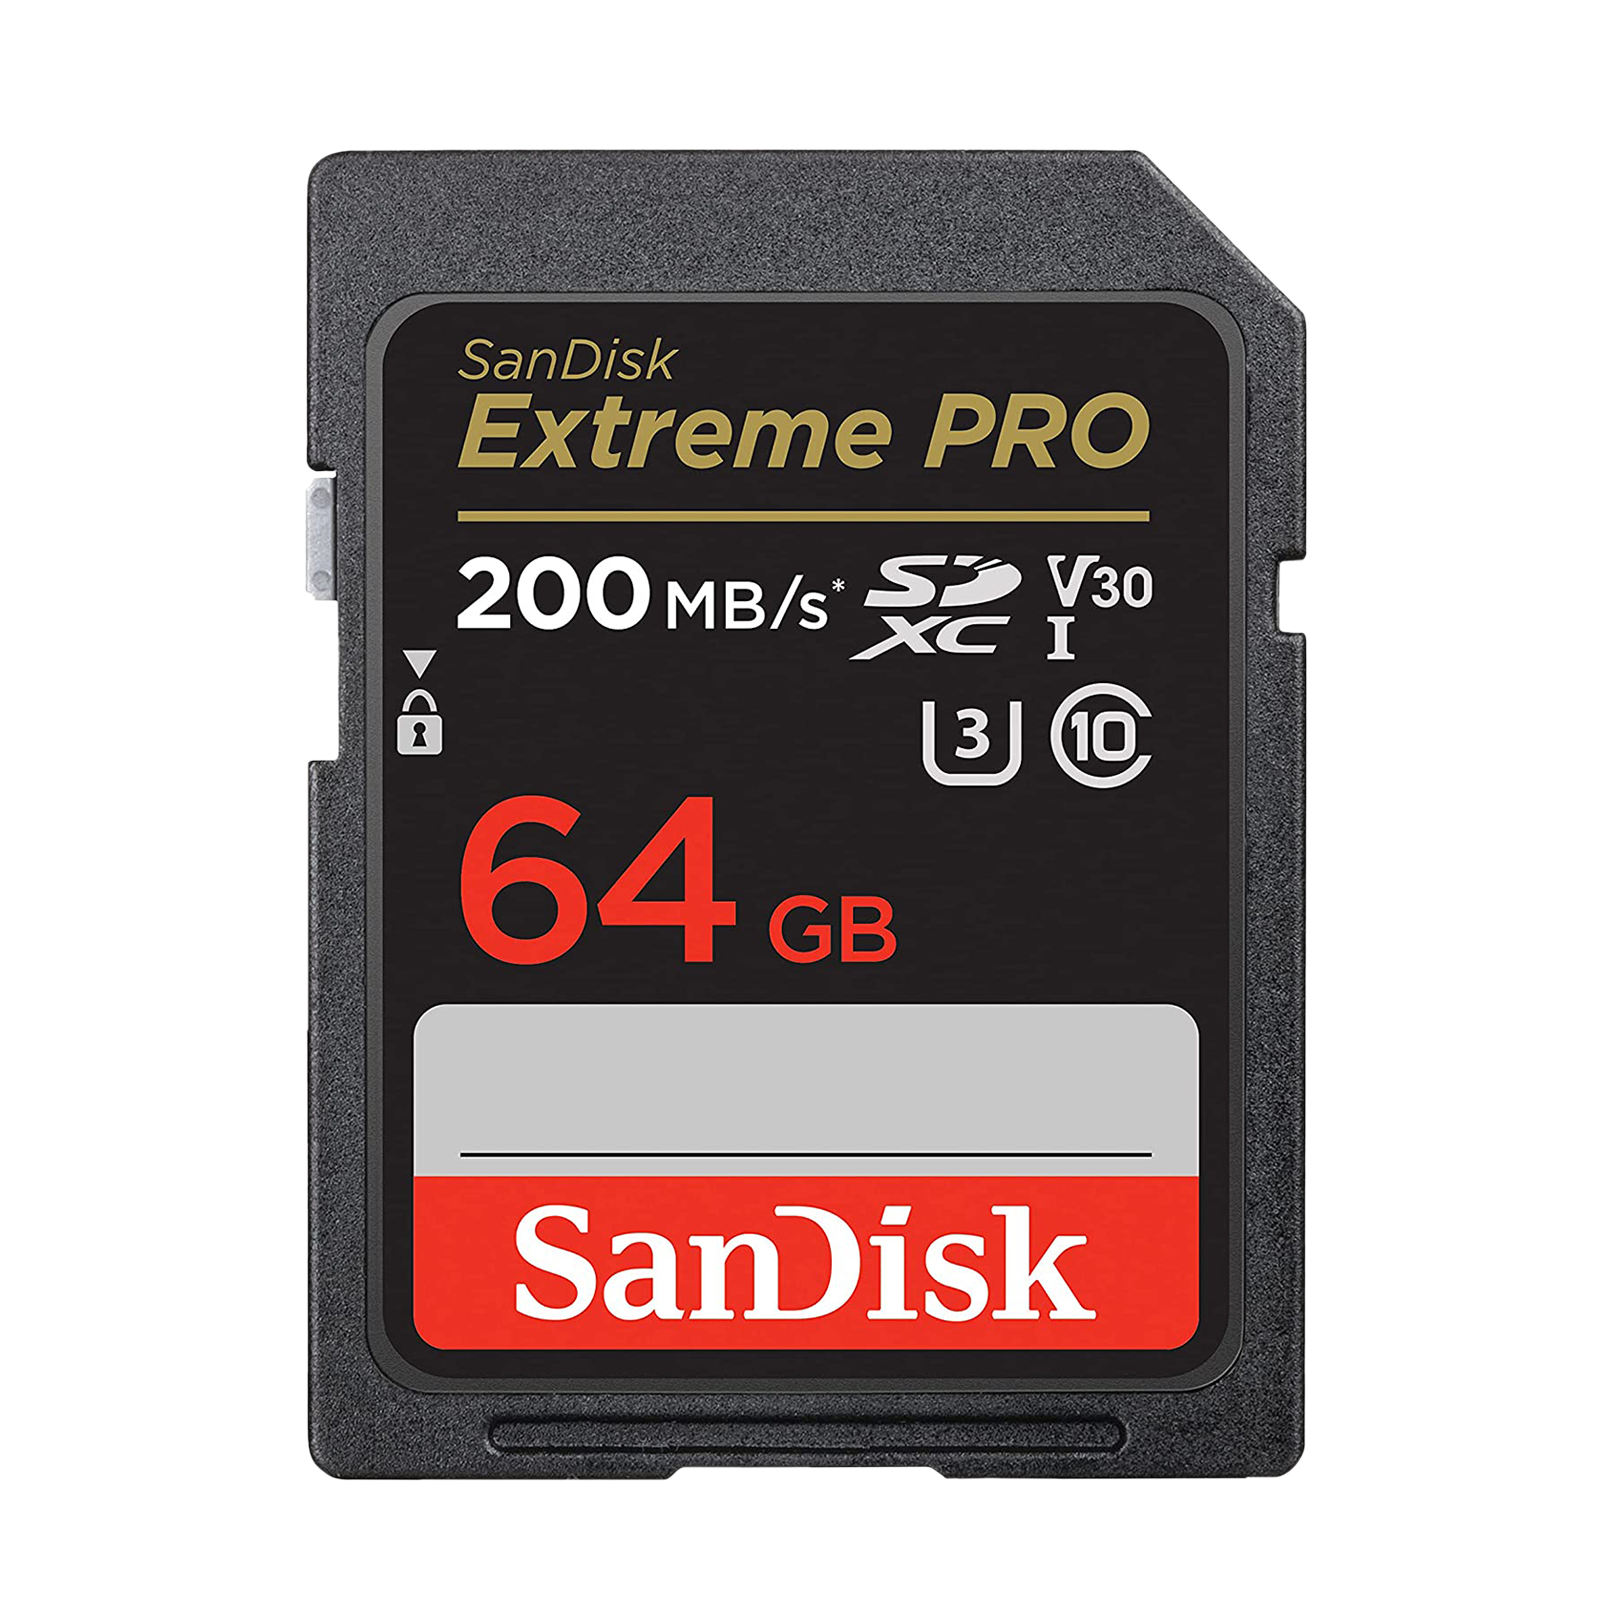 SanDisk Extreme Pro SDXC 64GB Class 10 200MB/s Memory Card